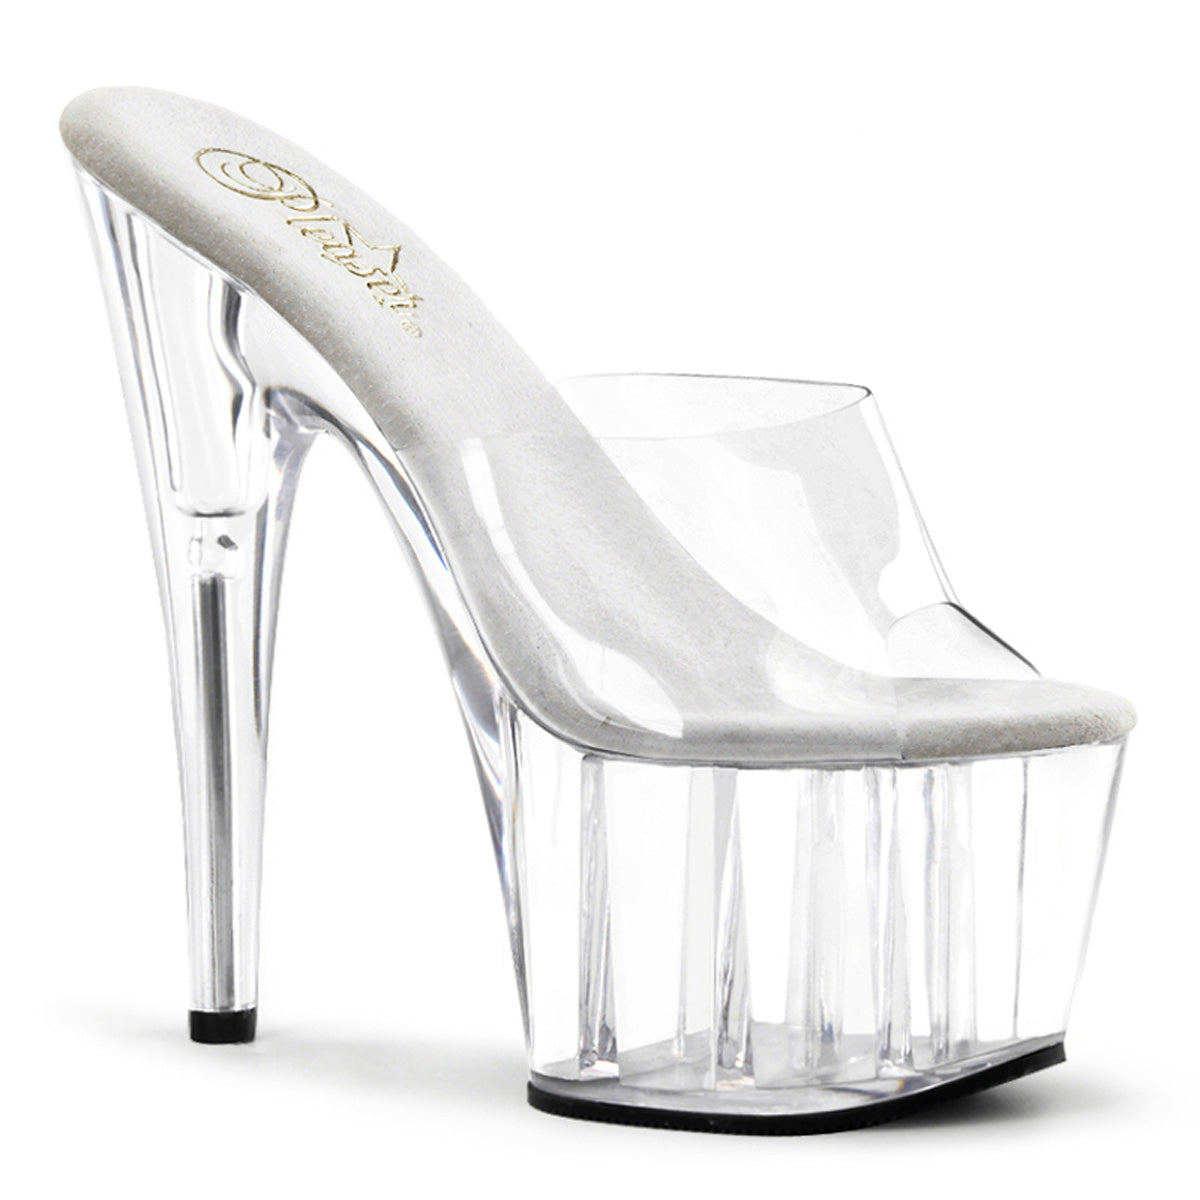 ADORE-701/C/M 7" PLEASER FAST DELIVERY 24-48h